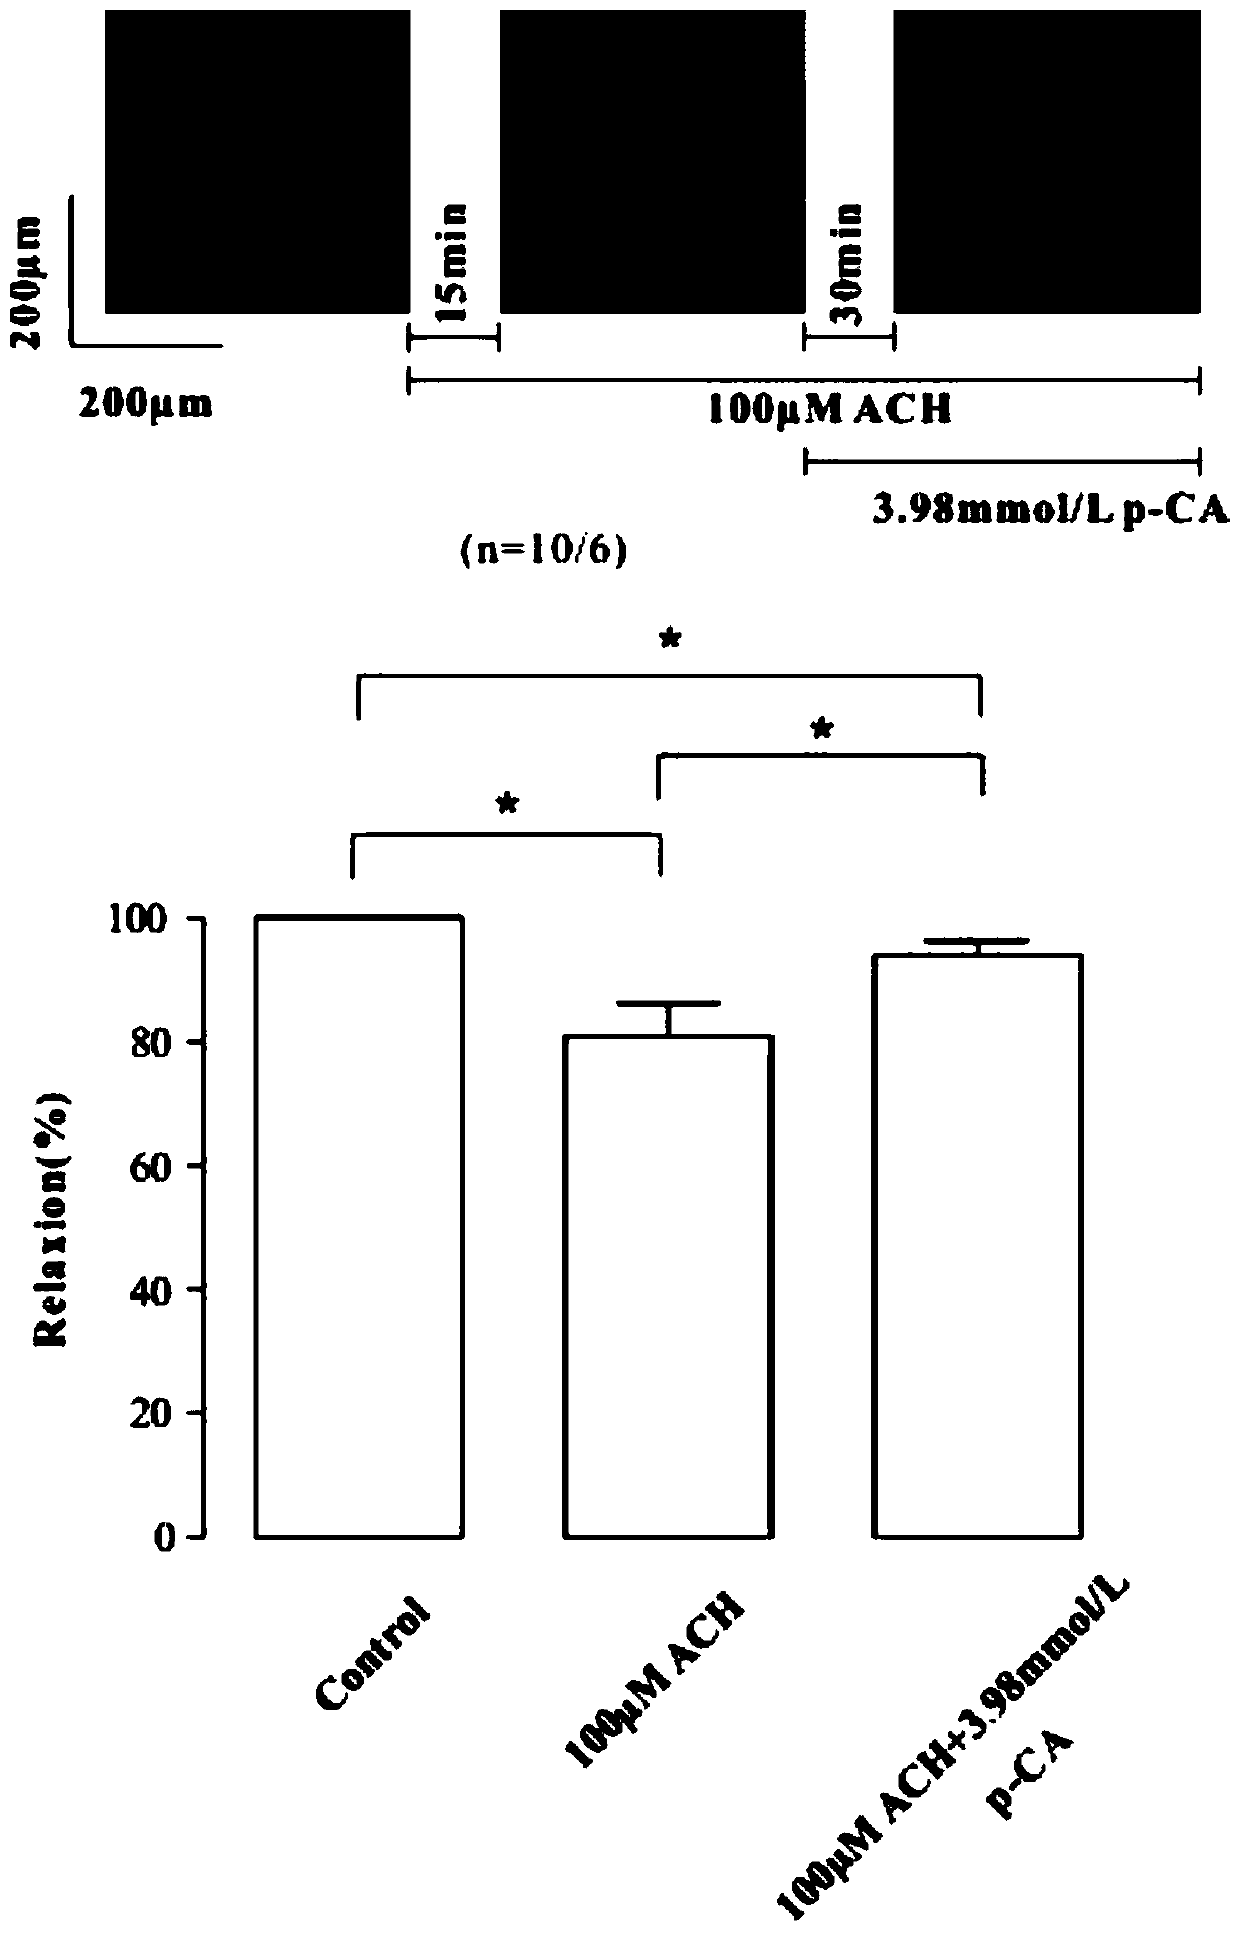 Application of p-coumaric acid (p-CA) in preparing drug for relaxing airway smooth muscle